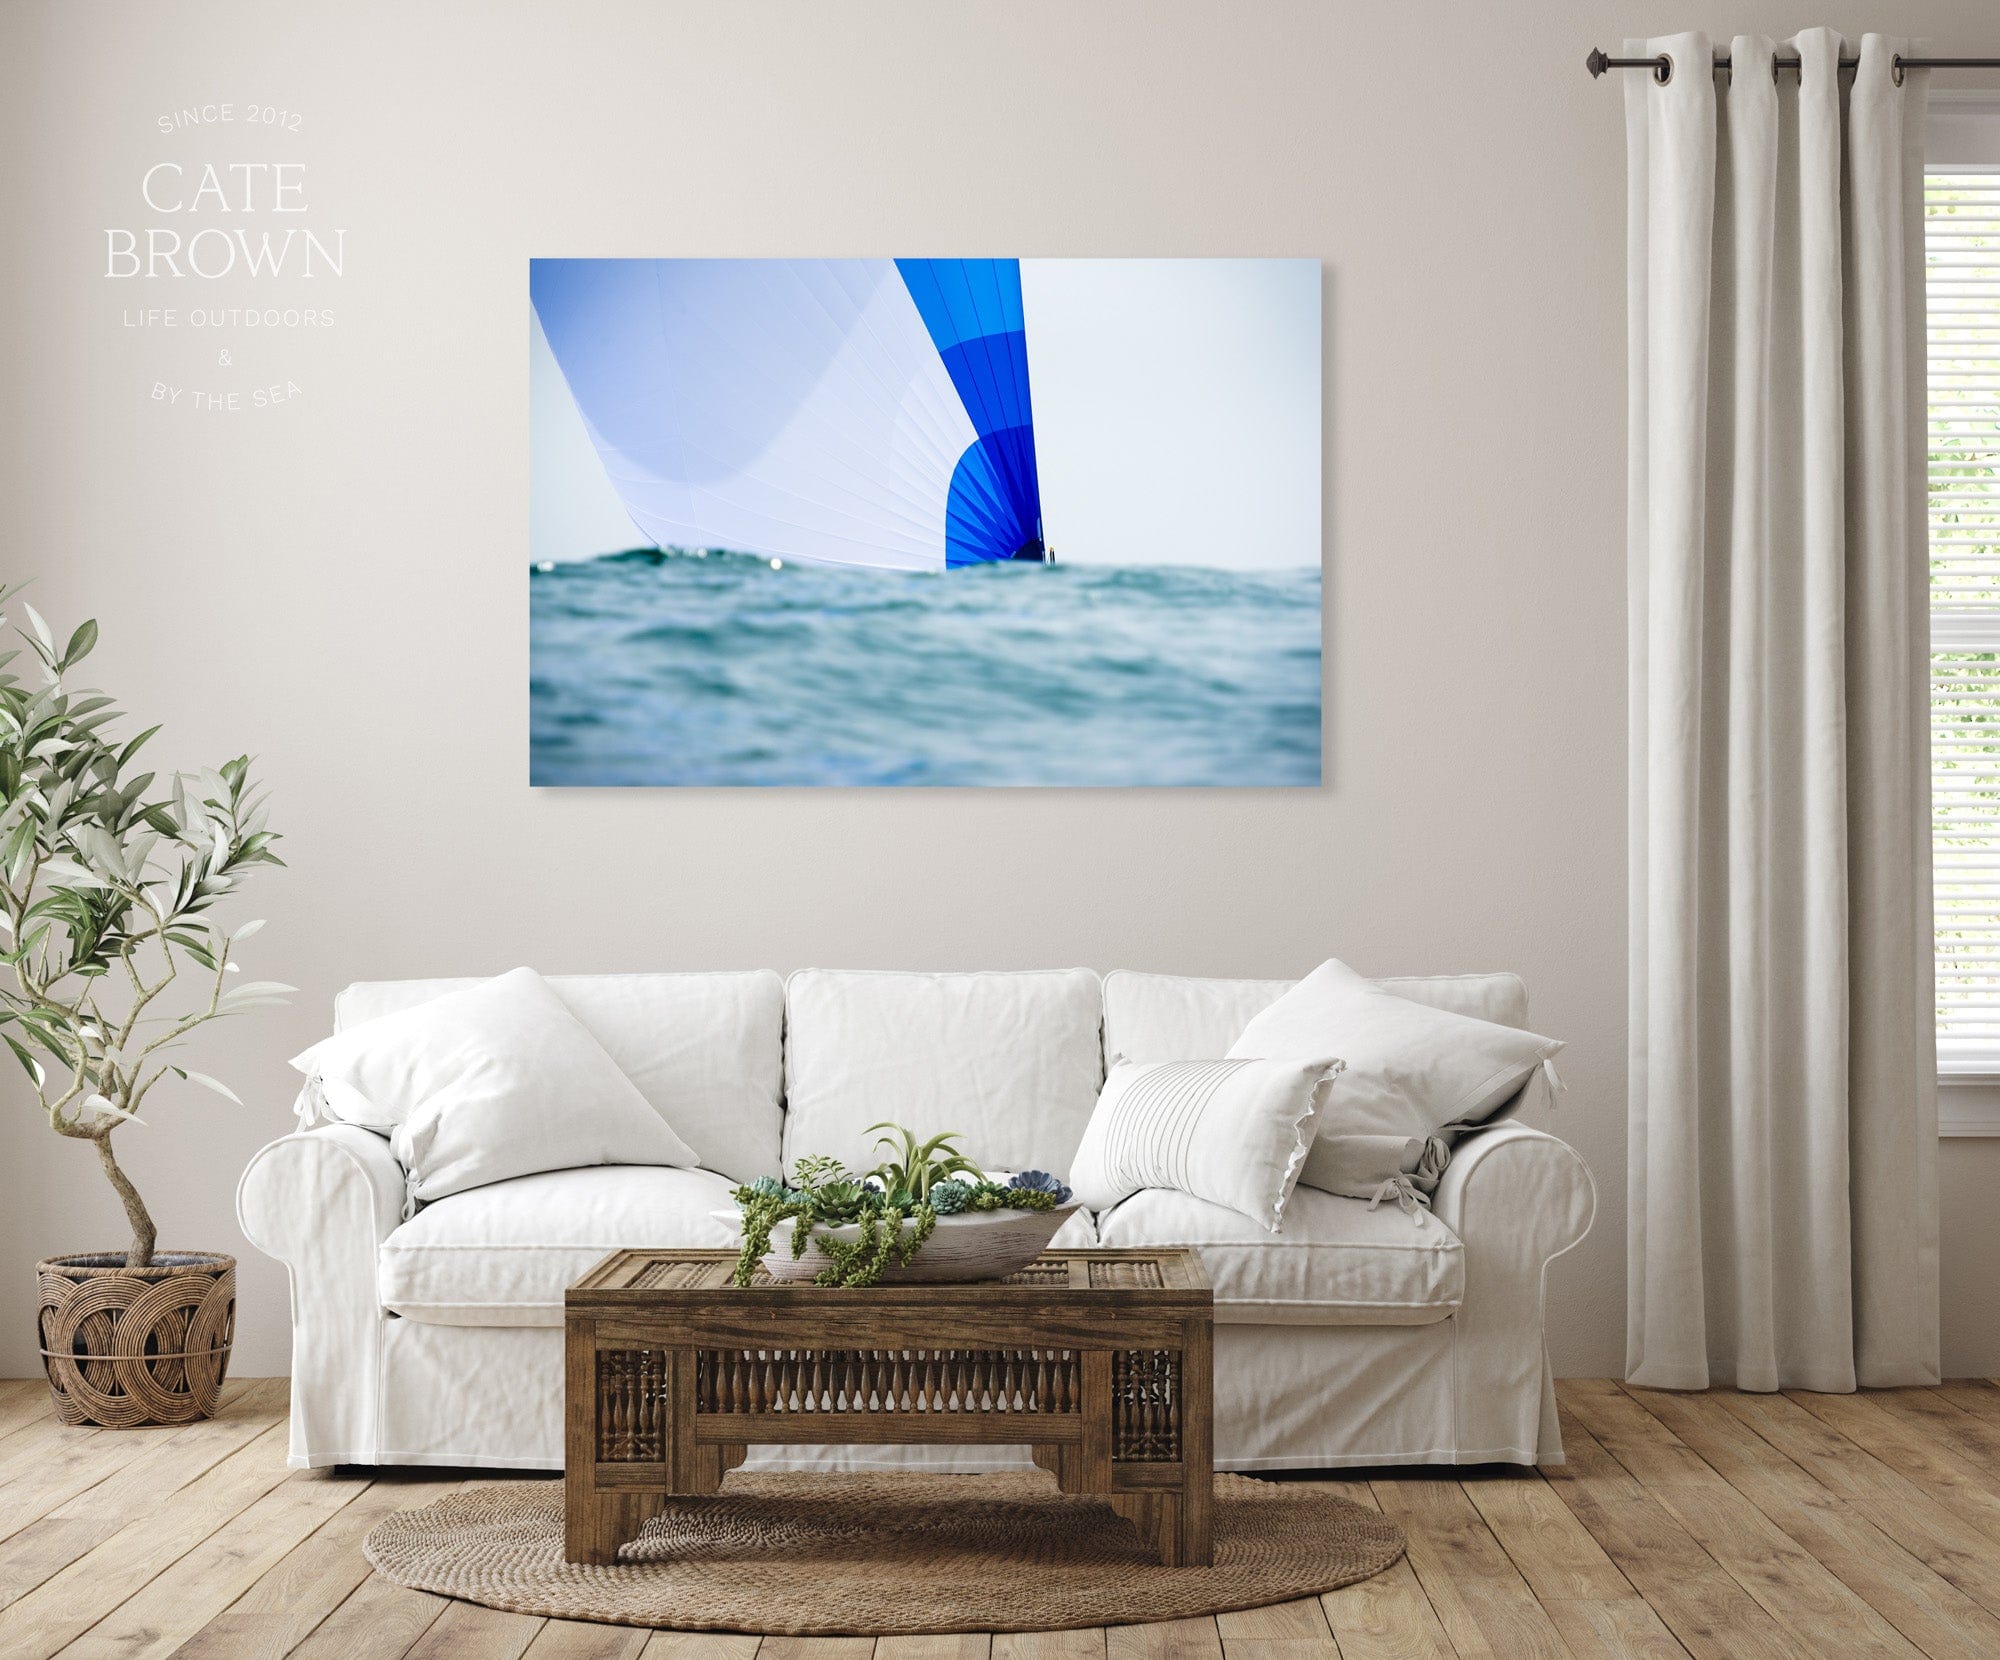 Cate Brown Photo Canvas / 16"x24" / None (Print Only) Ocean Spinnakers  //  Nautical Photography Made to Order Ocean Fine Art